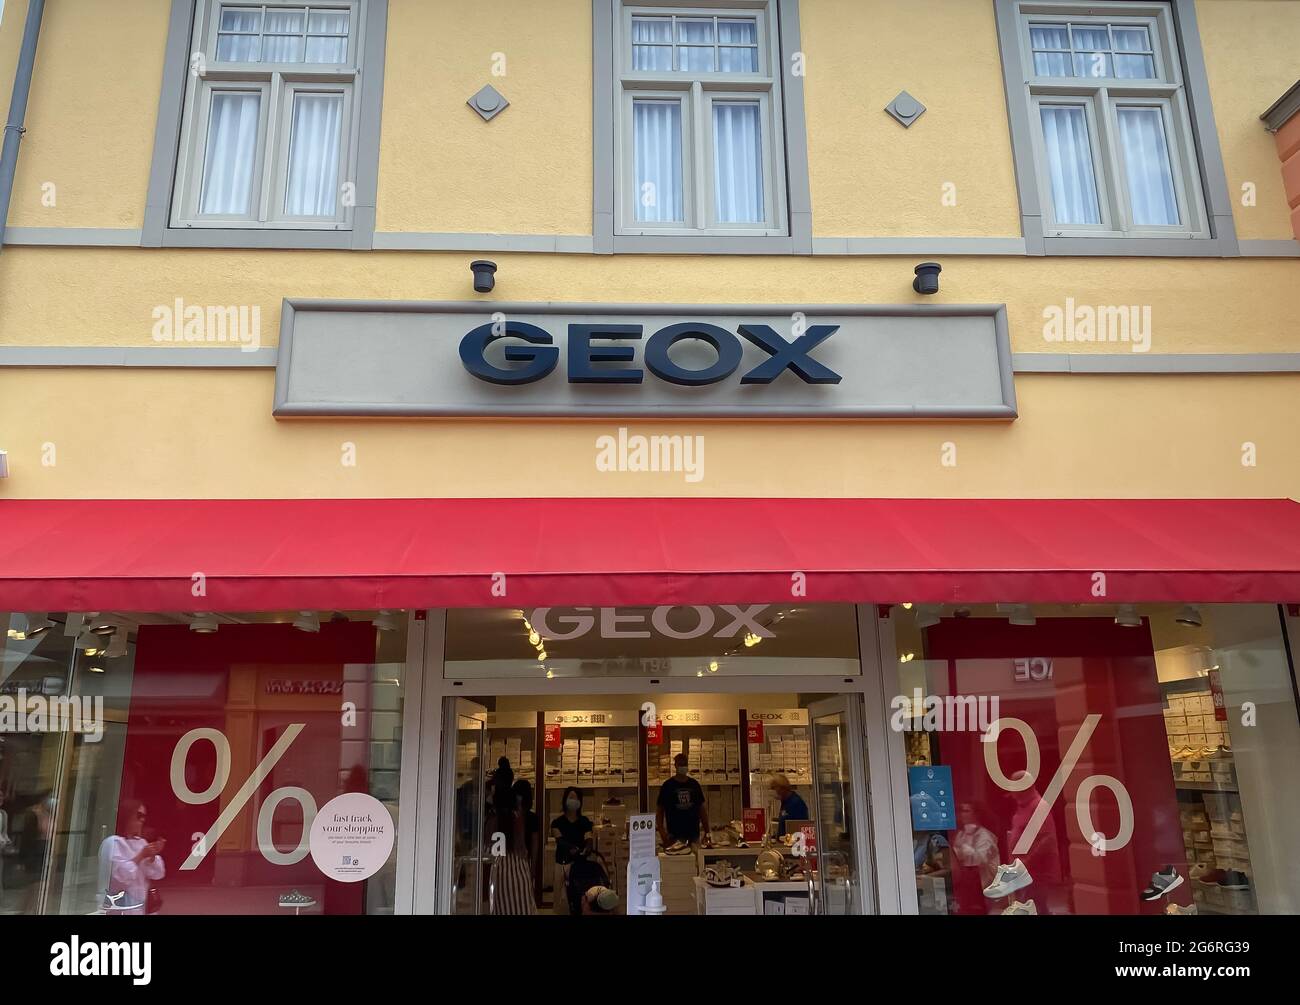 Roermond, Netherlands - July 1. 2021: View on store facade with logo  lettering of geox shoes Stock Photo - Alamy